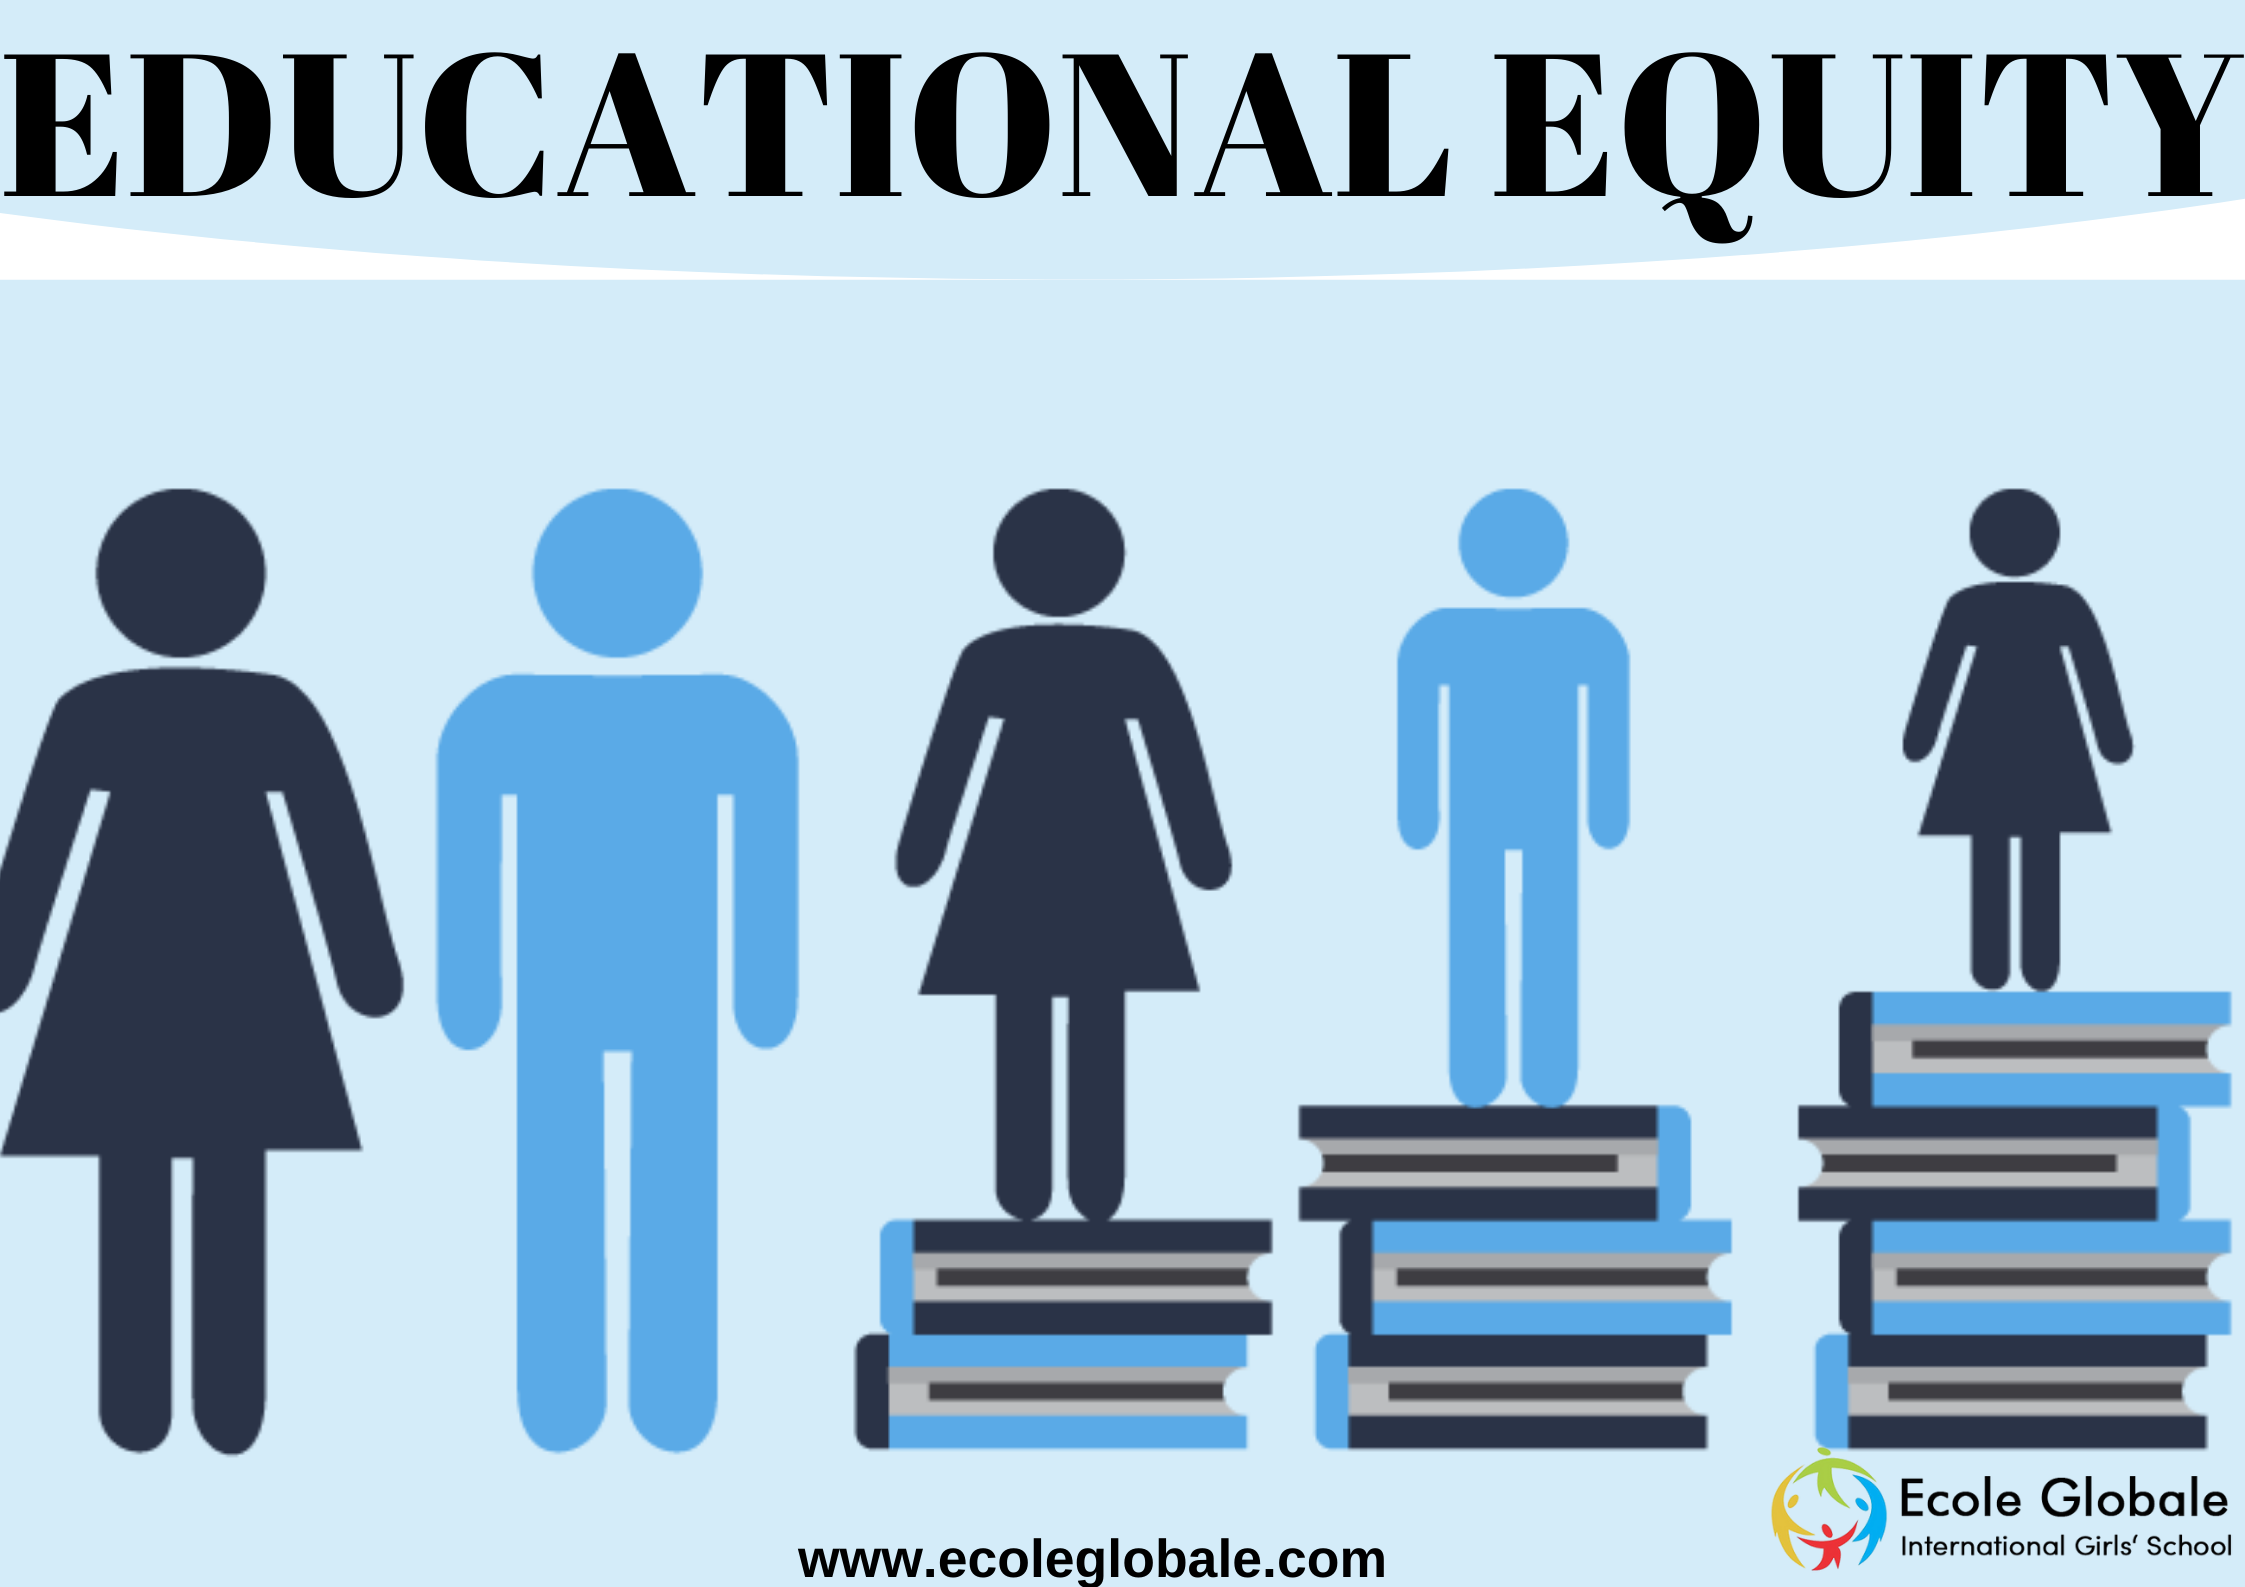 EDUCATIONAL EQUITY